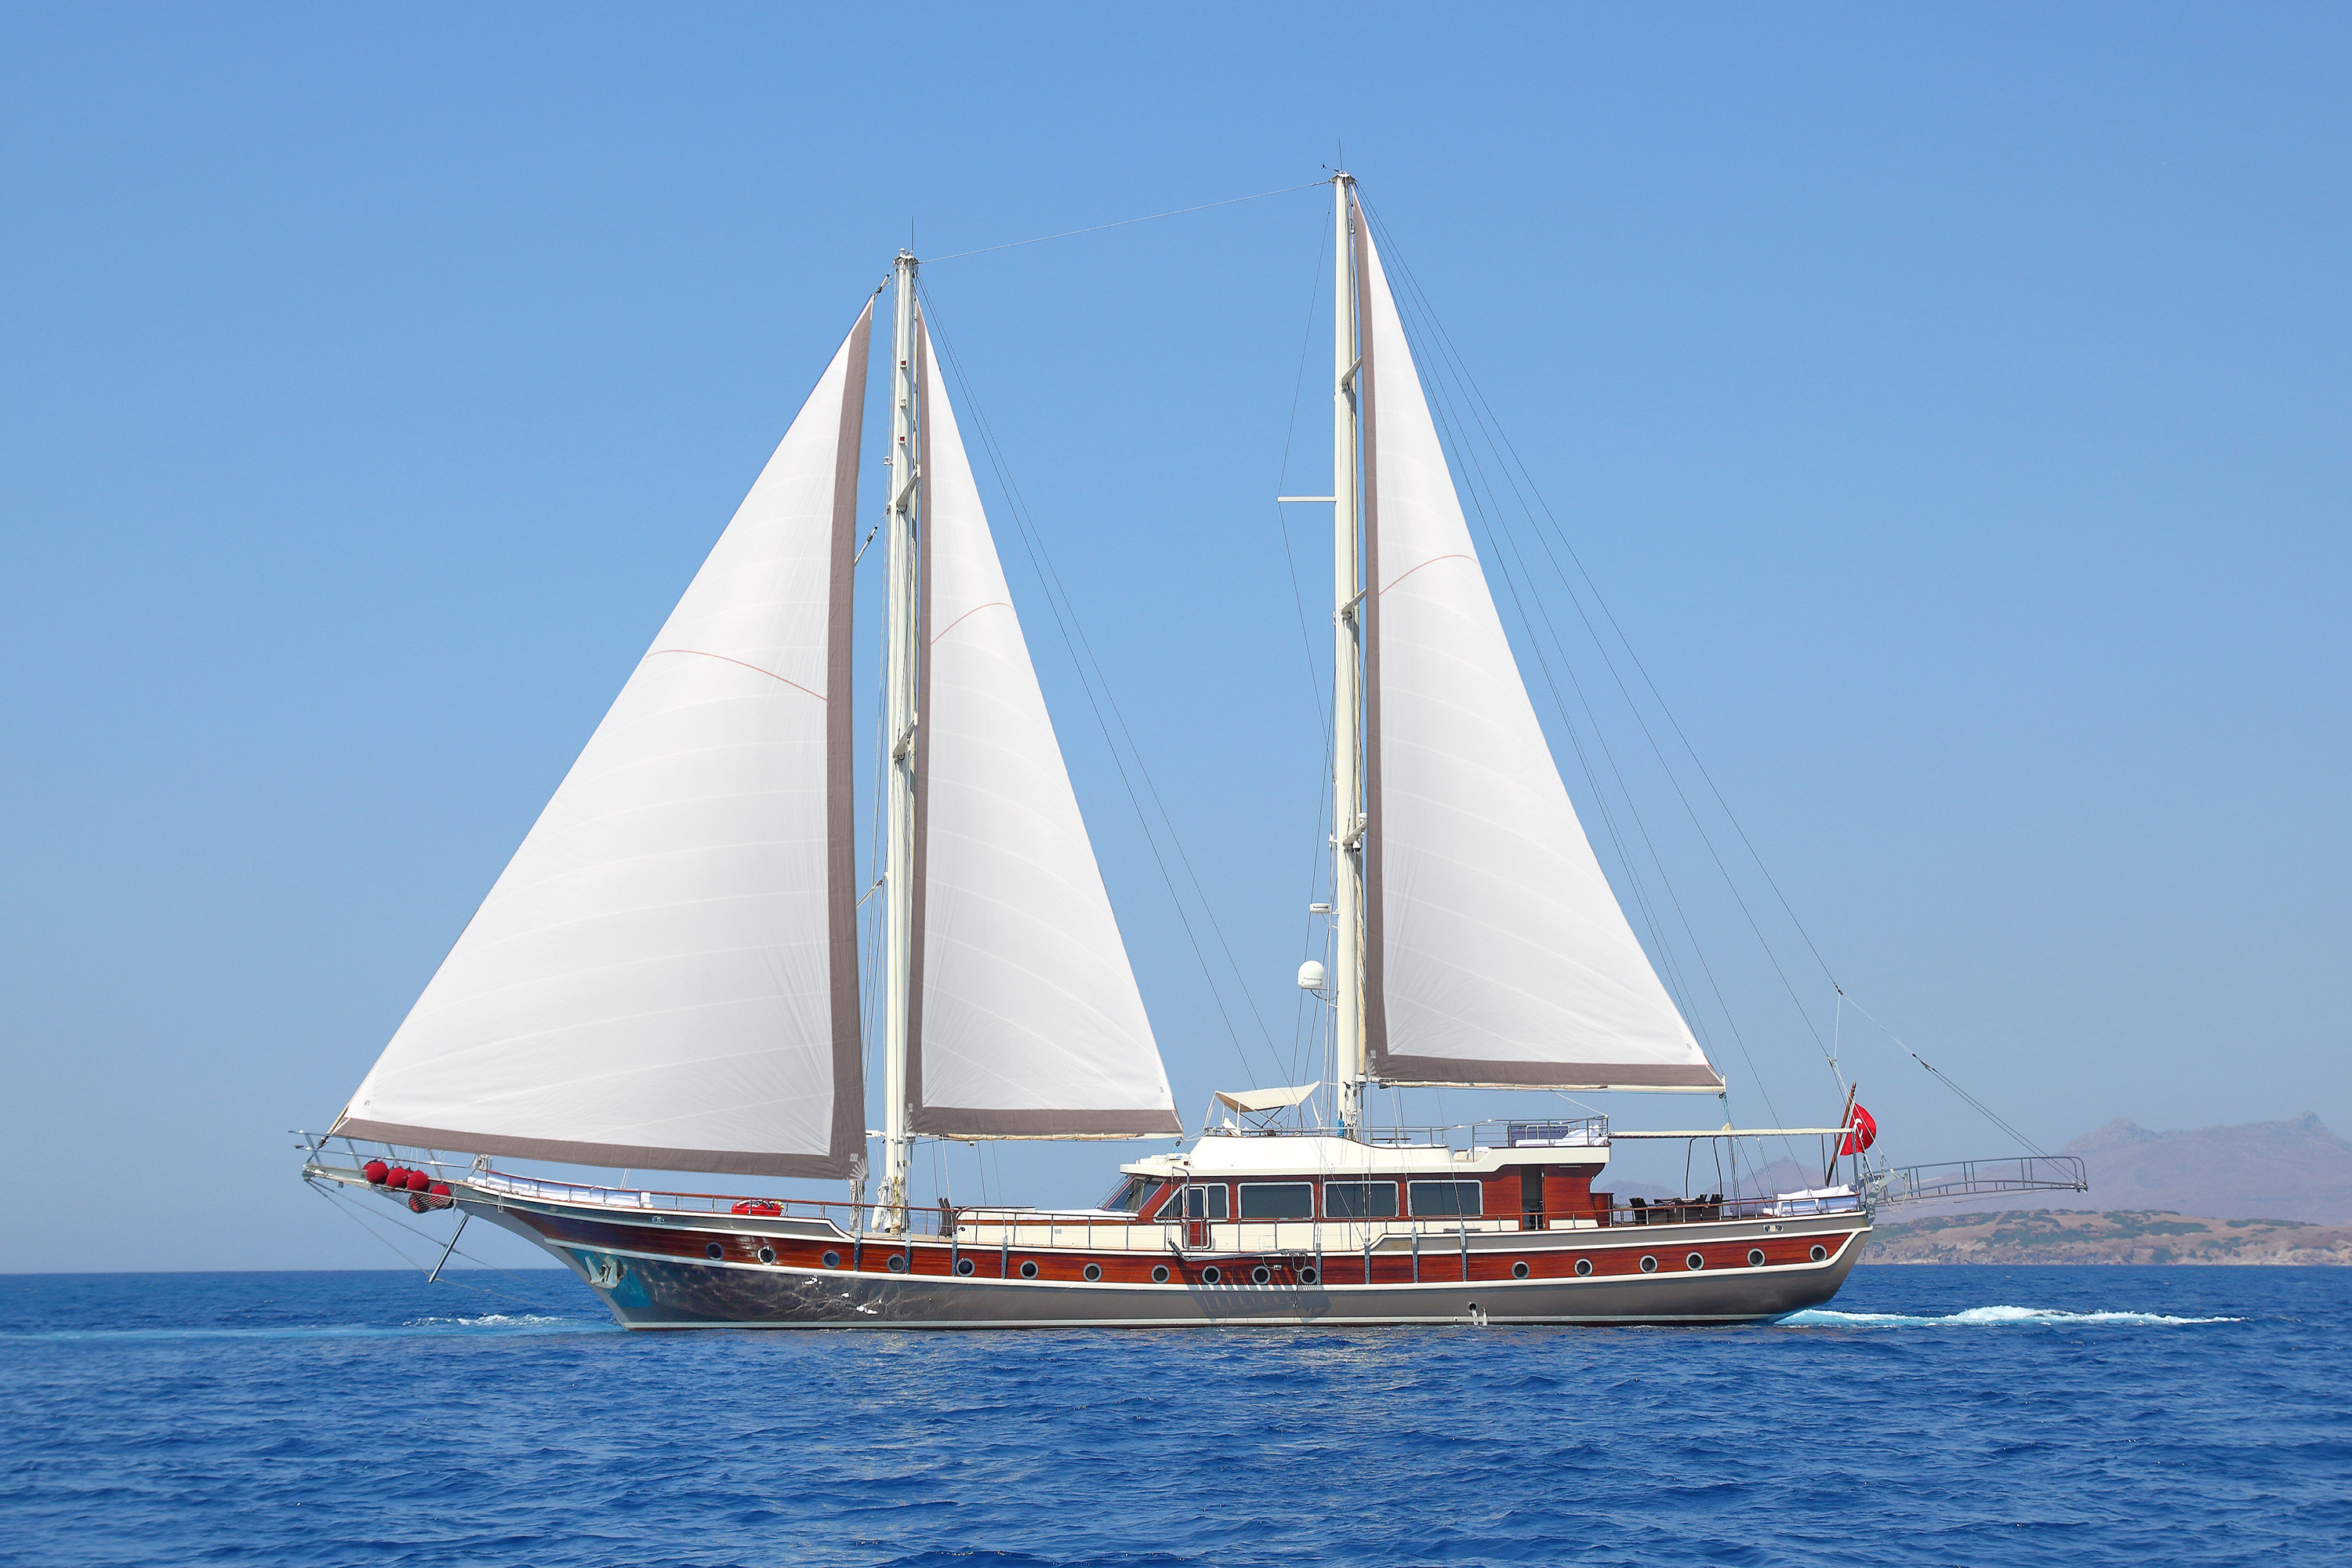 Double Eagle Yacht – June (Daily)